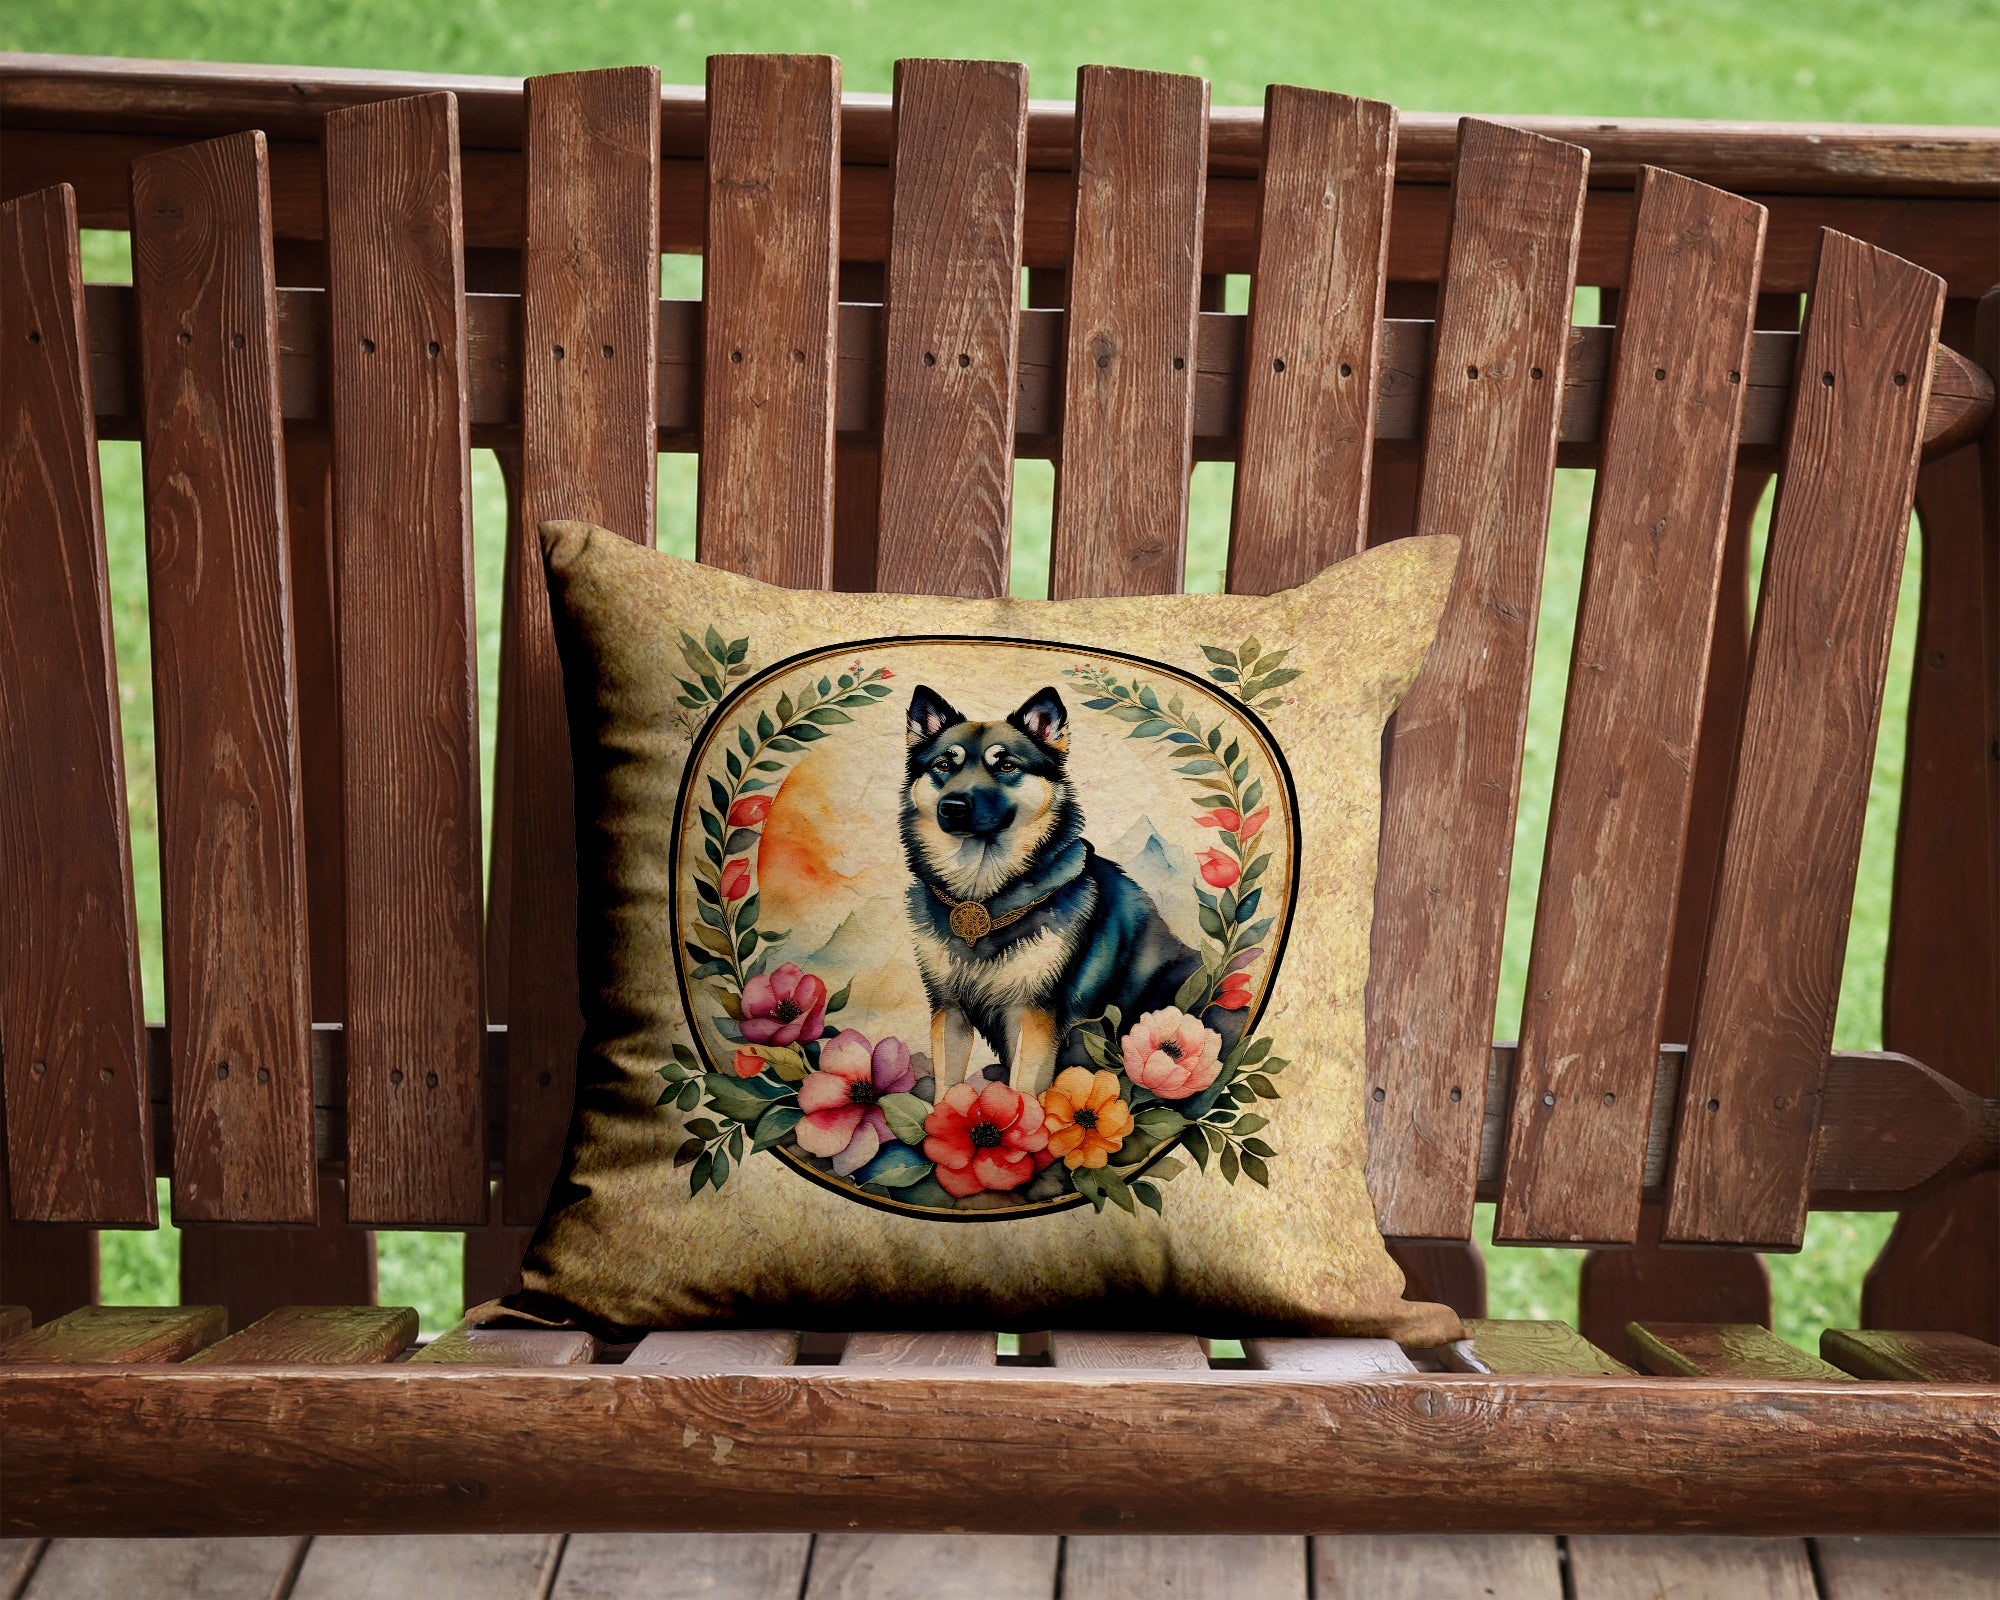 Buy this Norwegian Elkhound and Flowers Fabric Decorative Pillow